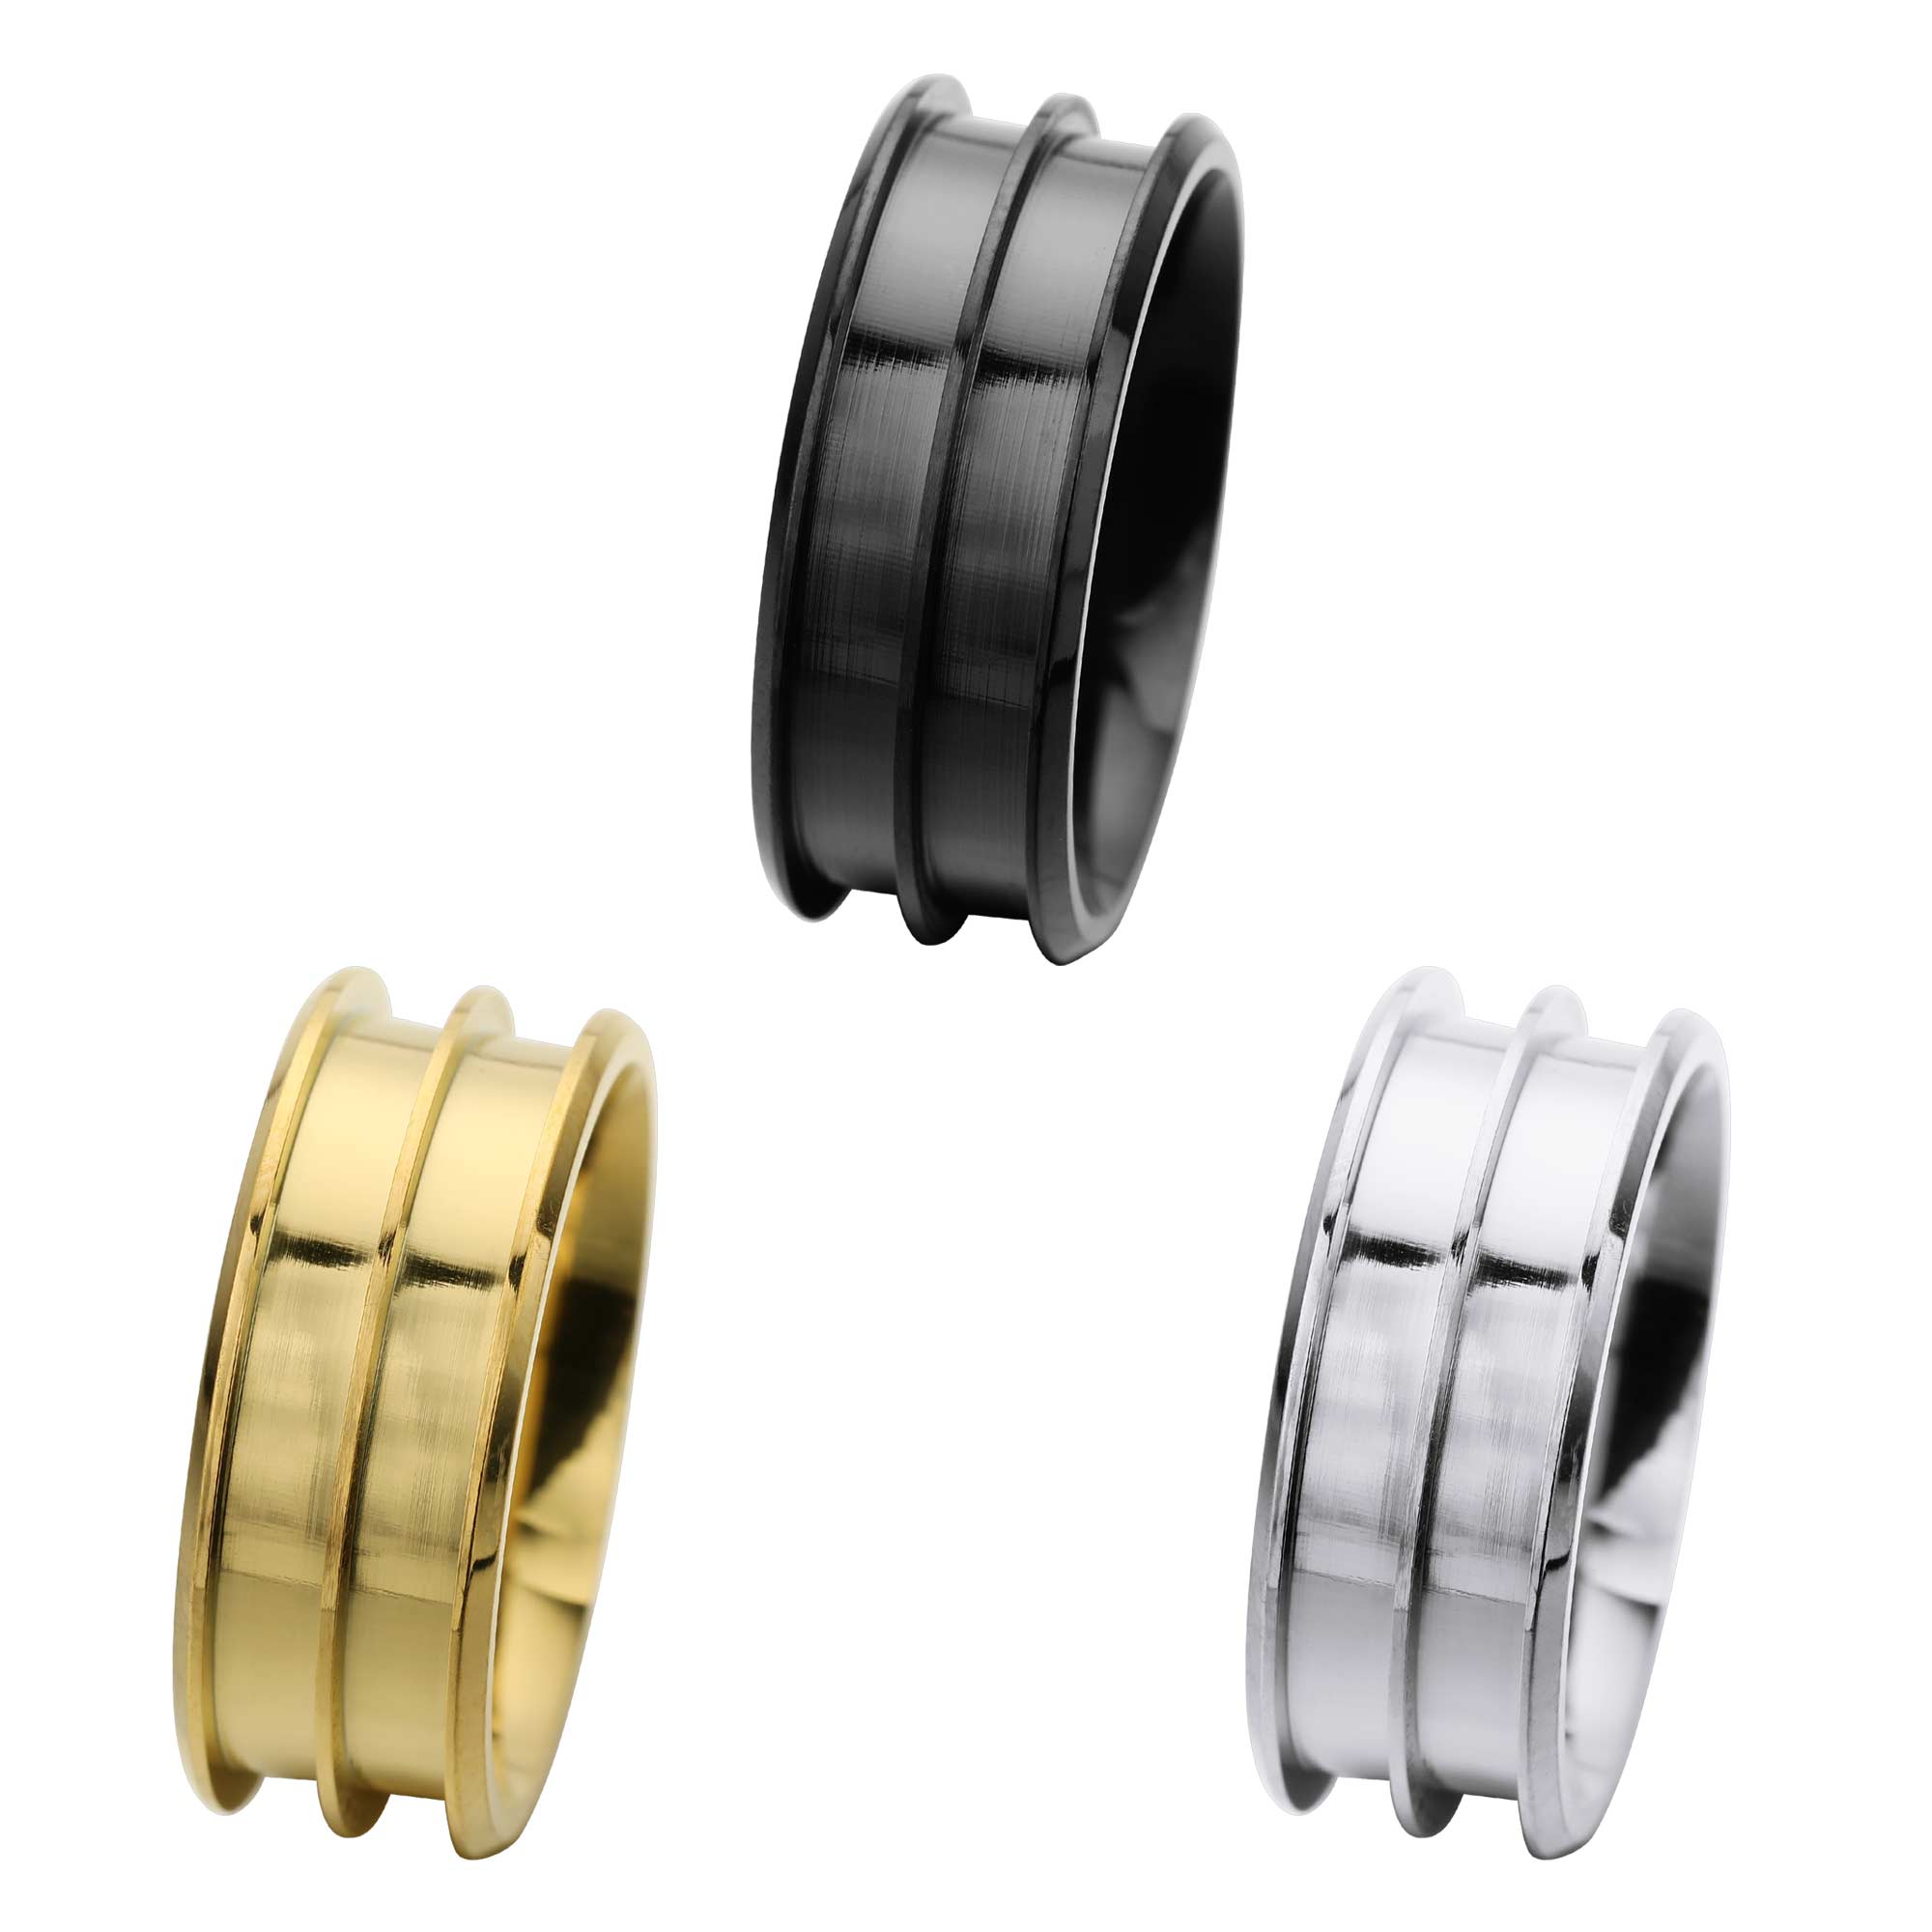 Keepsake Mens' Resin Ashes Channel Ring Settings,Double Channel Bezel Stainless Steel Ring Setting,Silver Gold DIY Ring Supplies,2.6MM Width Each Channel 1294594 - Click Image to Close